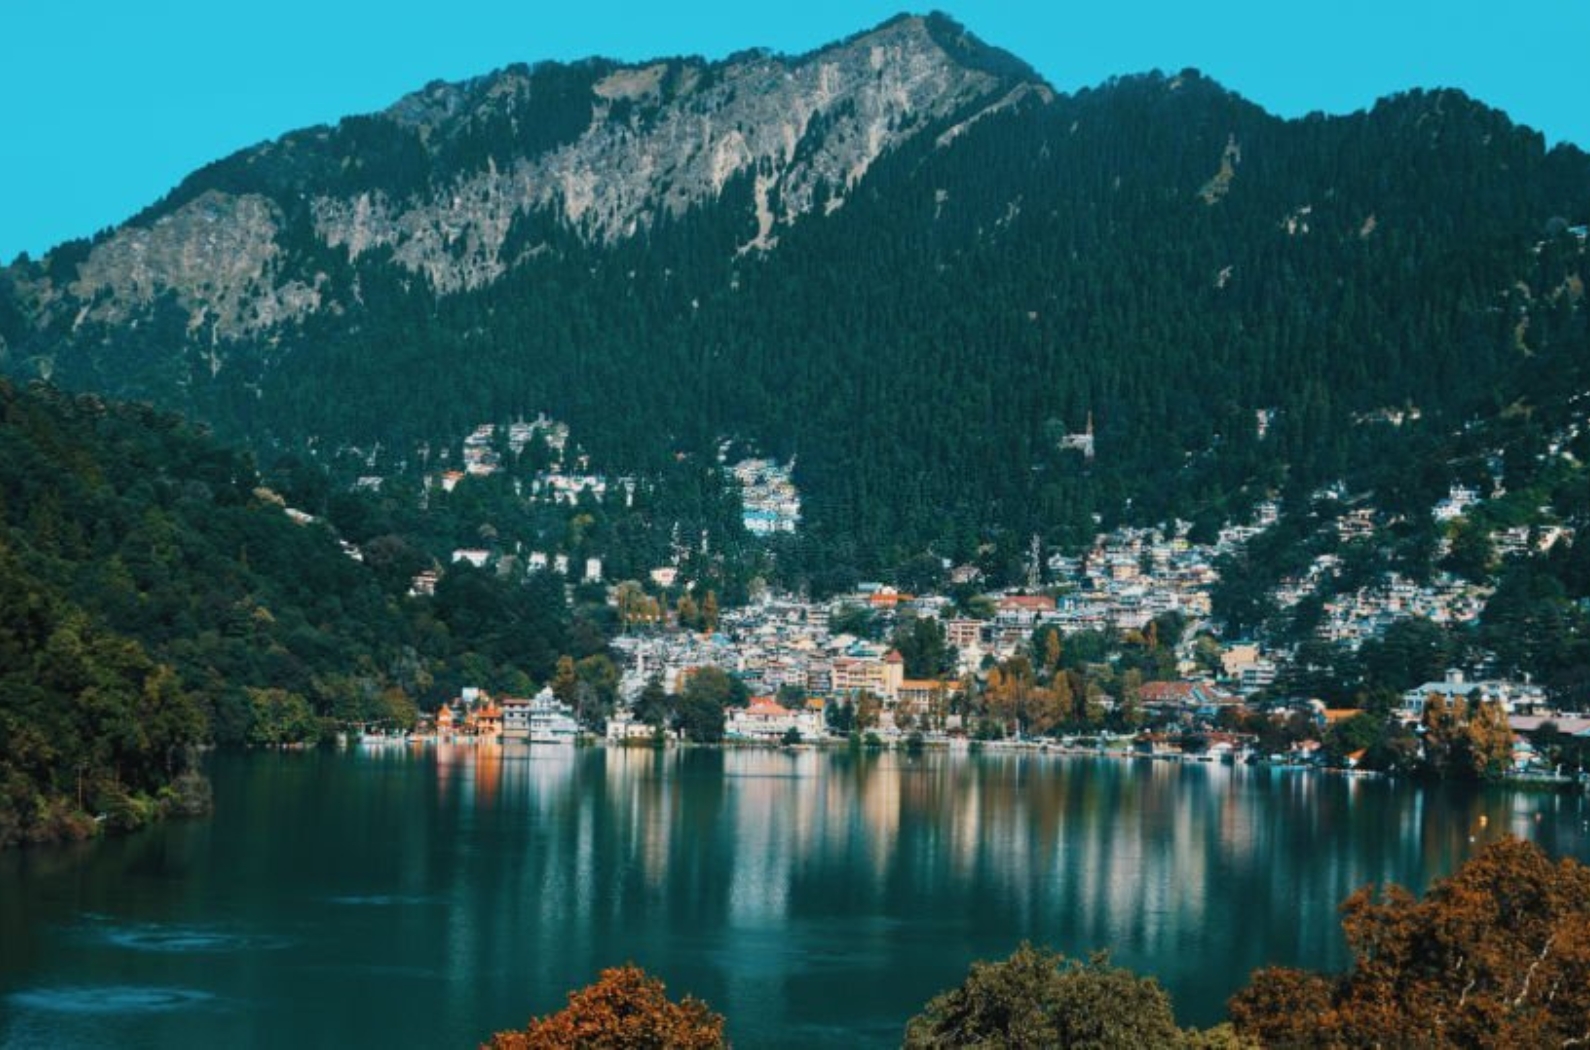 Nainital Lake, a natural freshwater body, situated amidst the township of Nainital in Uttarakhand State of India, tectonic in origin, is kidney shaped or crescent shaped and has an outfall at the southeastern end. Nainital is most popular.